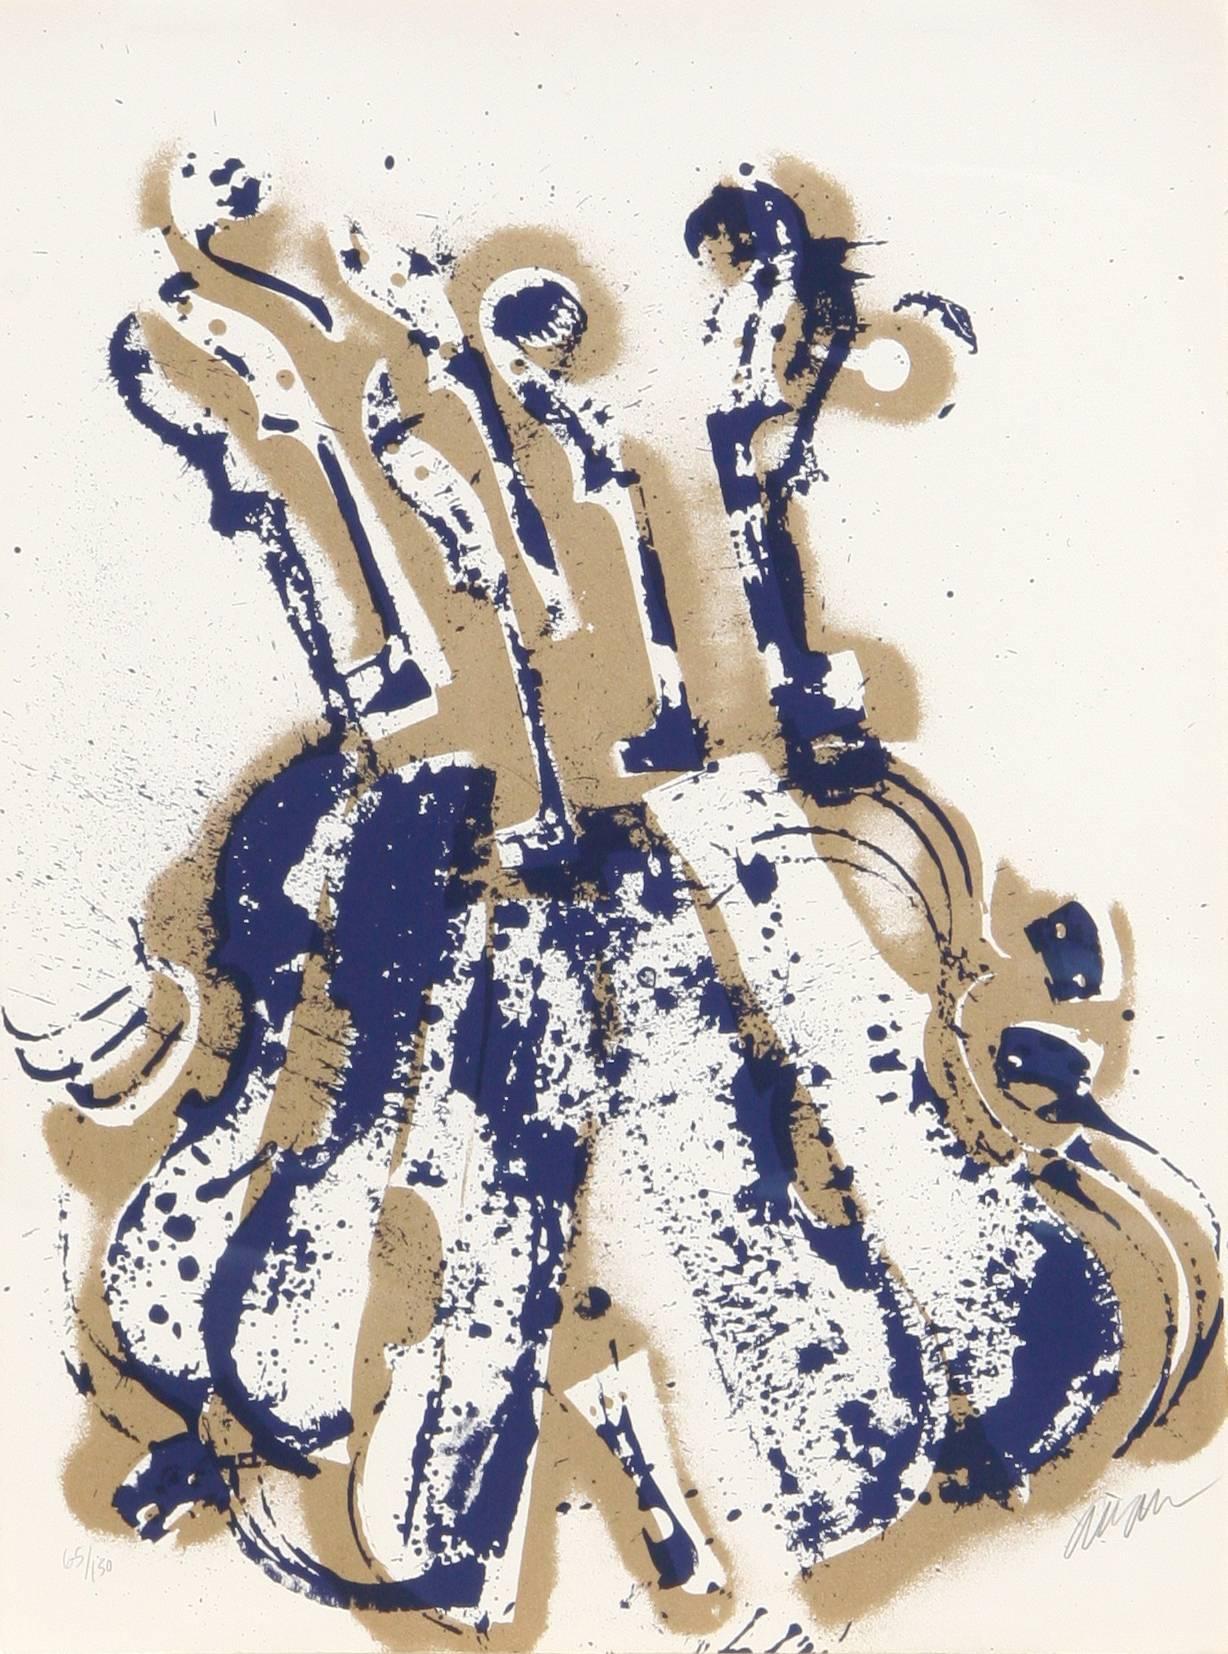 Artist:  Arman, French (1929 - 2005)
Title:  Yves Klein's Violins
Year:  1979
Medium:  Screenprint on Arches Paper, signed and numbered in pencil
Edition:  150
Size:  30 in. x 22 in. (76.2 cm x 55.88 cm)